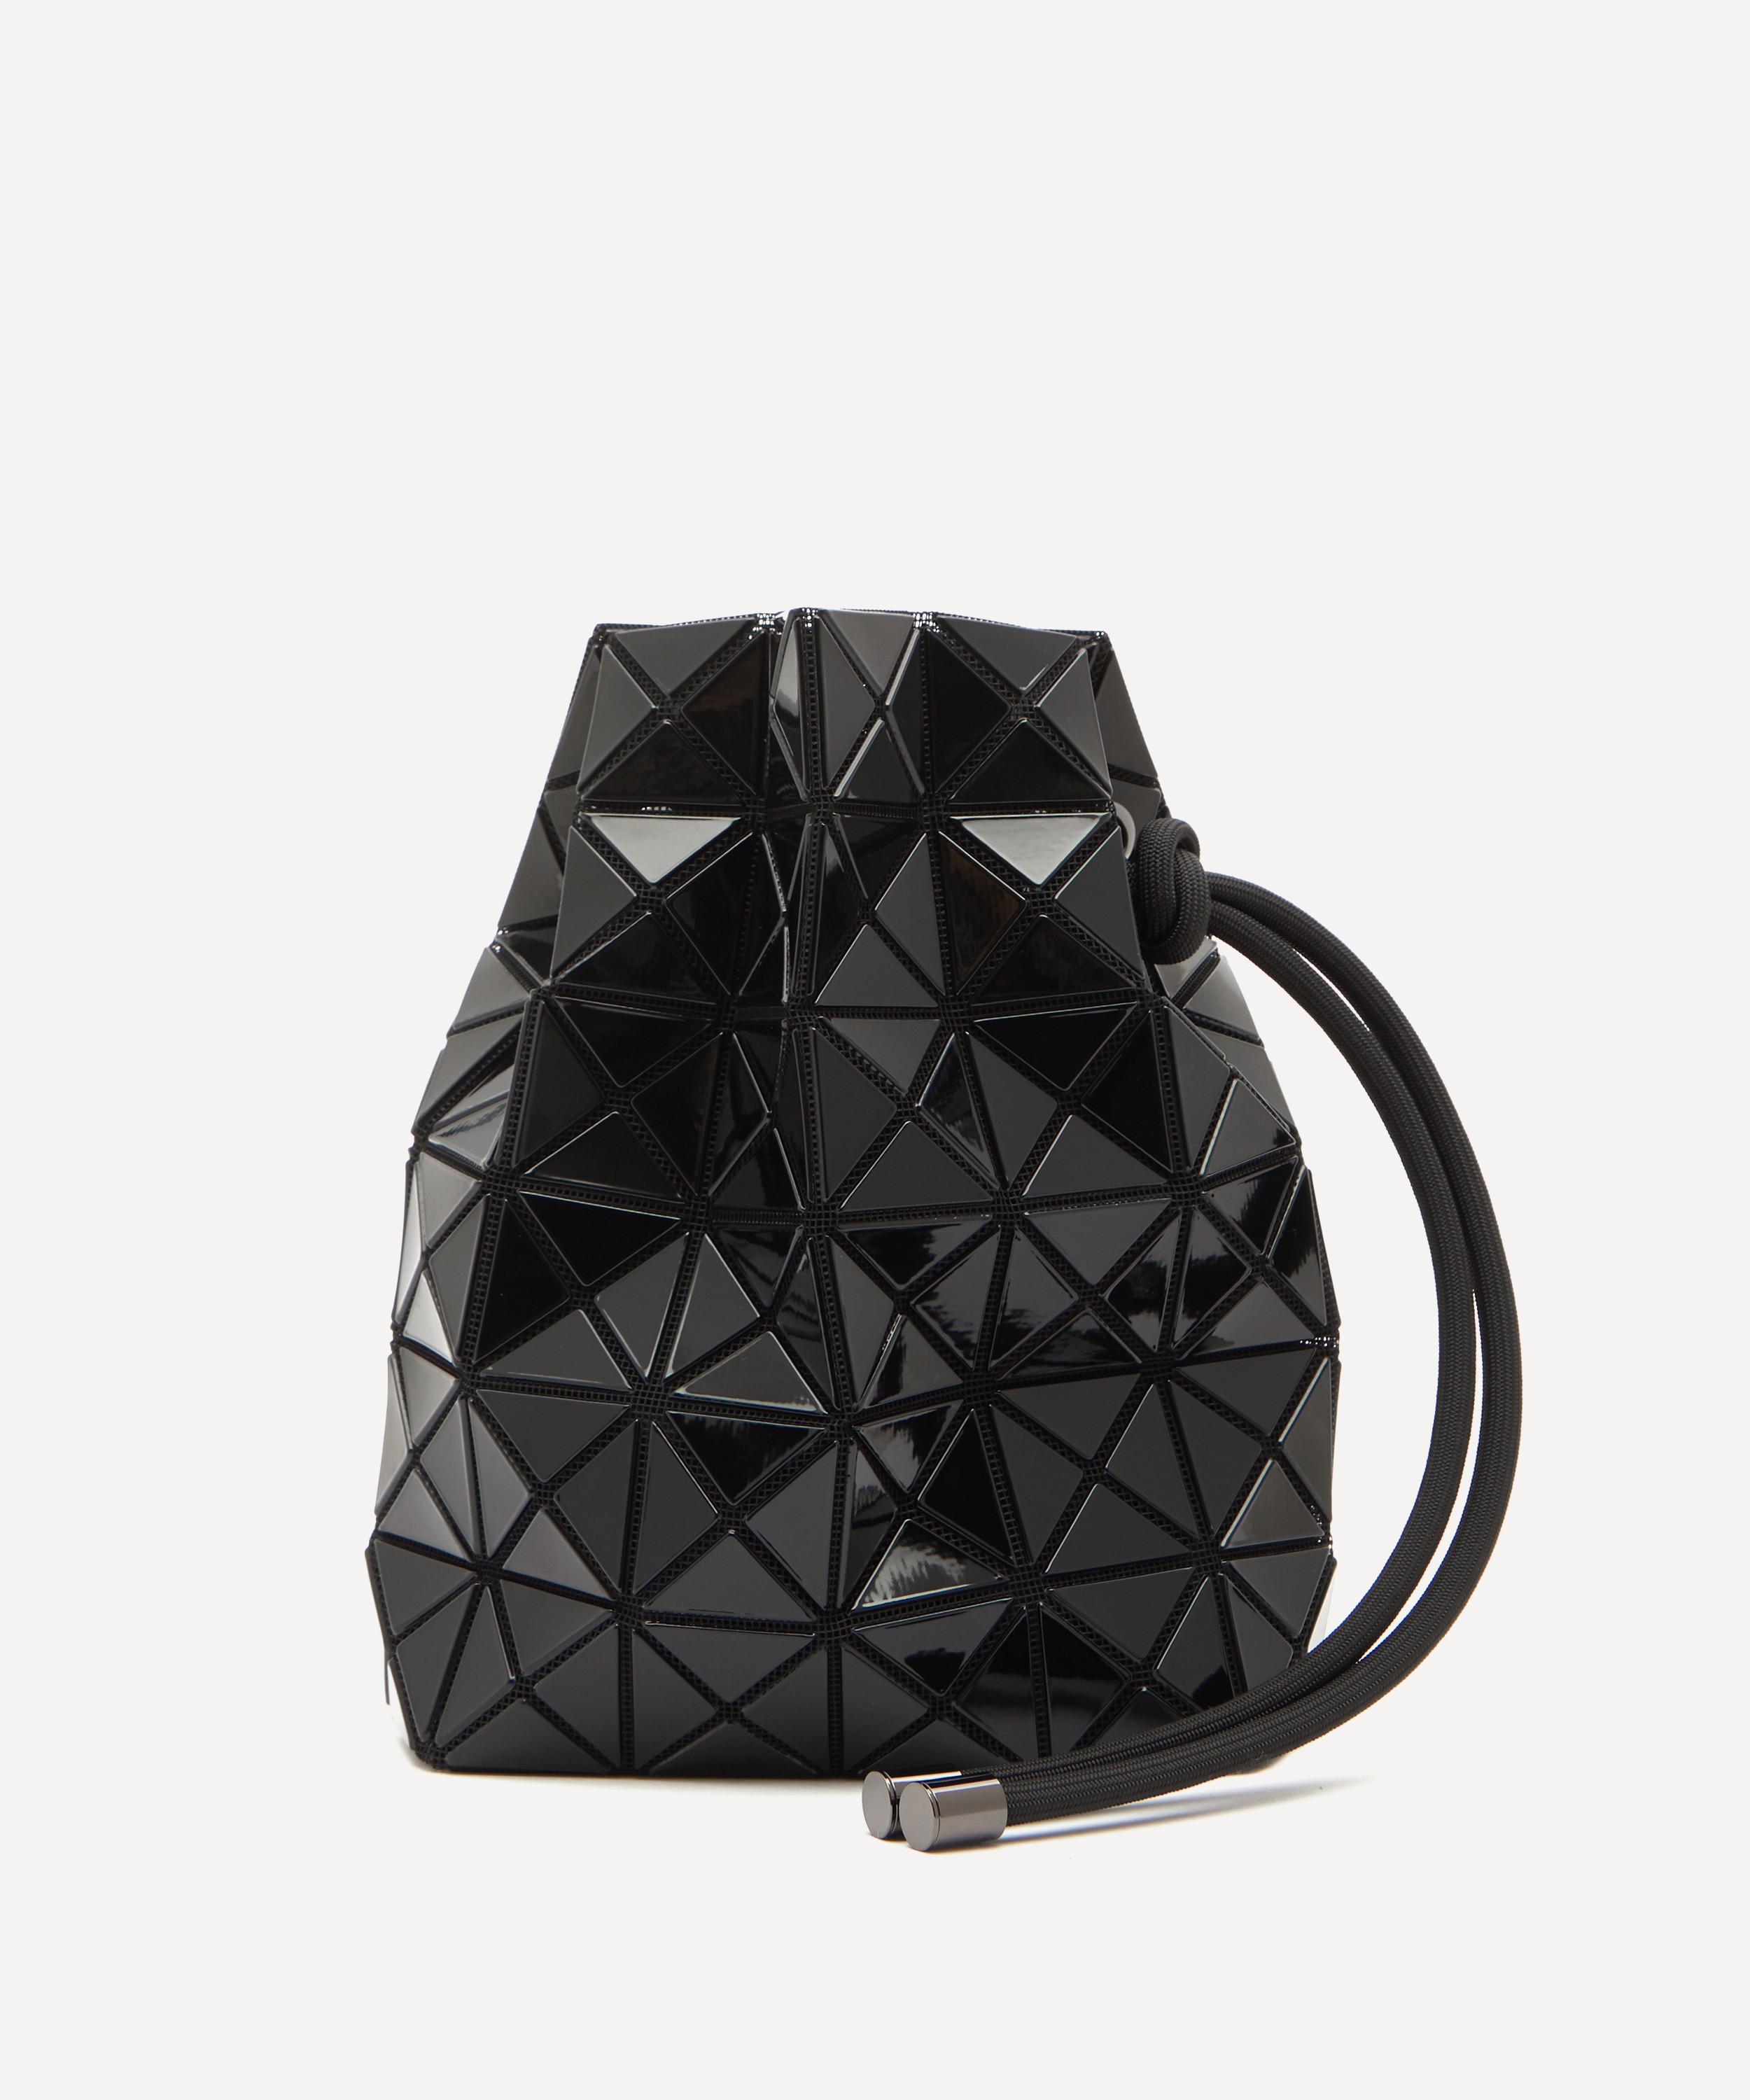 Outfit ideas - How to wear BAO BAO ISSEY MIYAKE (United States) - WEAR